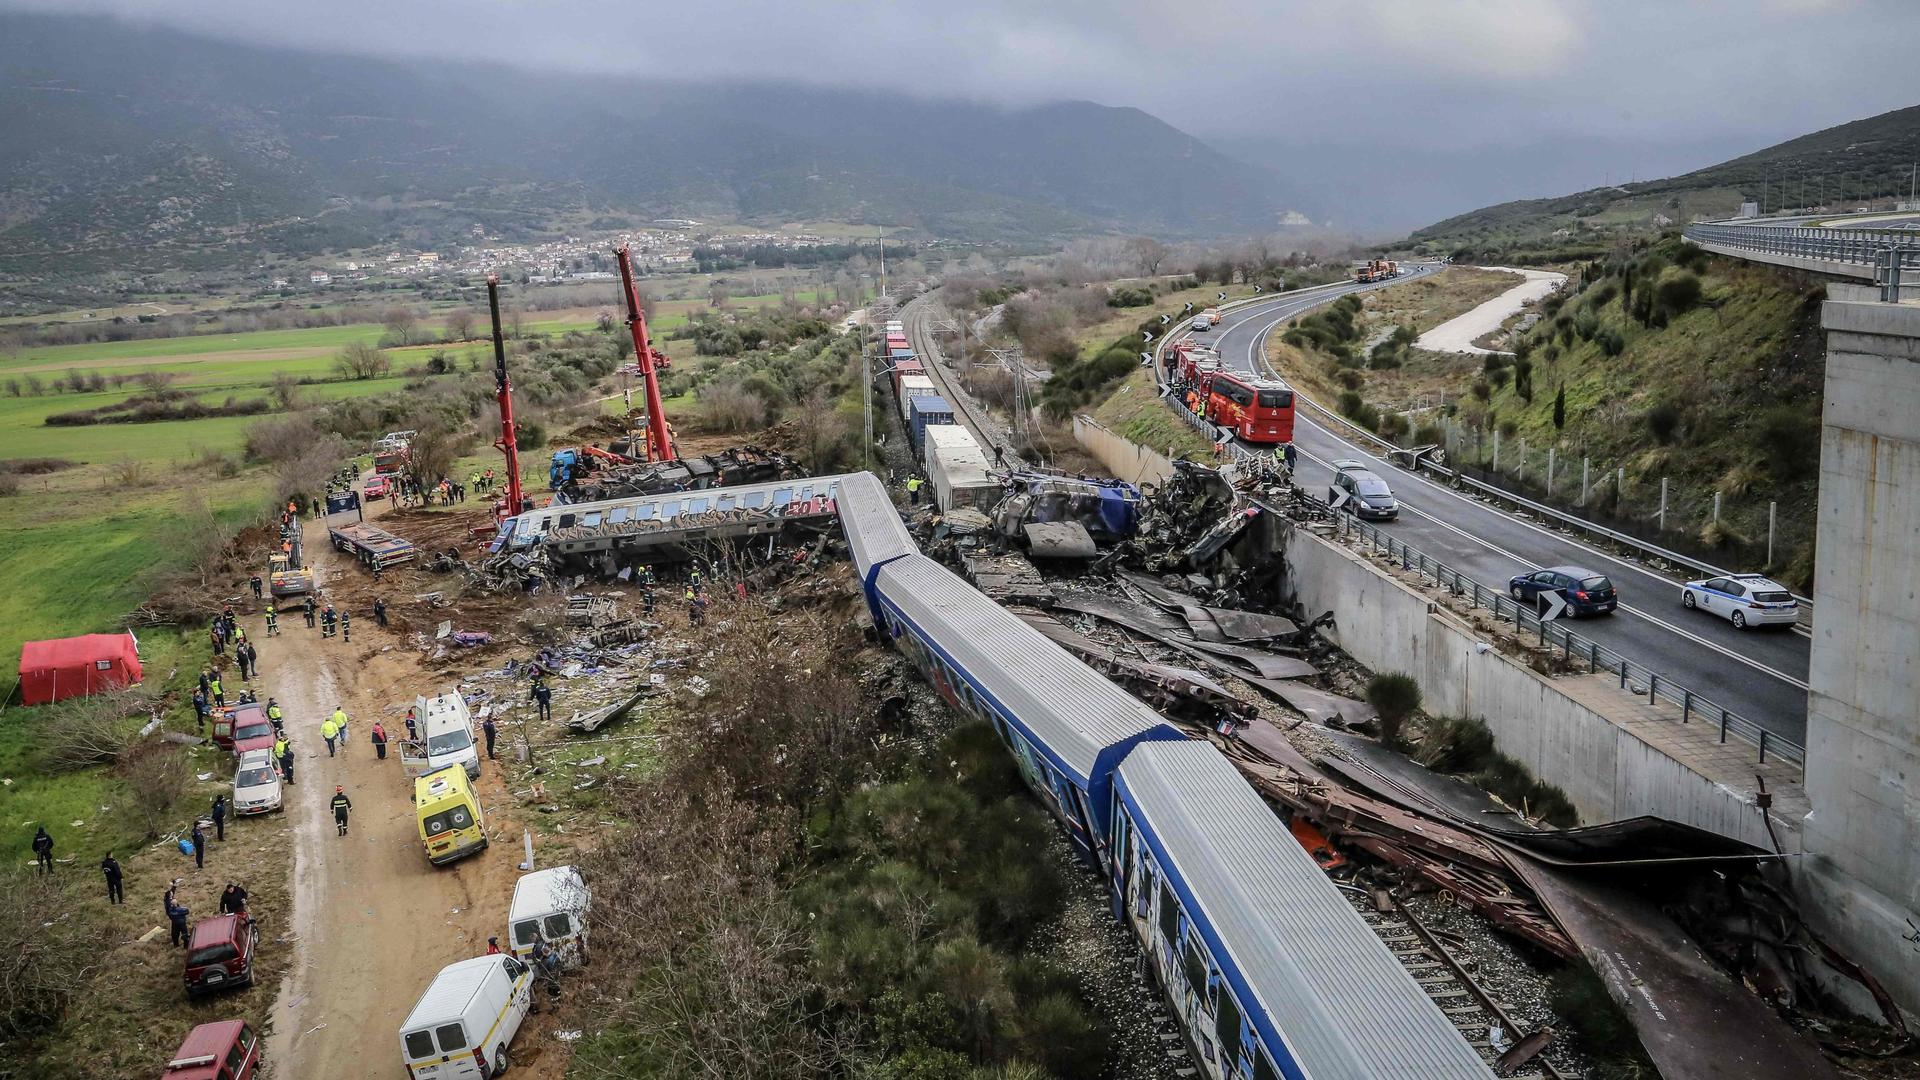 Police and emergency crews search the debris of a crushed wagon after a train accident in the Tempi Valley near Larissa, Greece, March 1, 2023. - At least 32 people were killed and another 85 injured after a collision between two trains caused a derailment near the Greek city of Larissa late at night on February 28, 2023, authorities said. A fire services spokesman confirmed that three carriages skipped the tracks just before midnight after the trains -- one for freight and the other carrying 350 passengers �- collided about halfway along the route between Athens and Thessaloniki. (Photo by Zekas LEONIDAS / Eurokinissi / AFP)